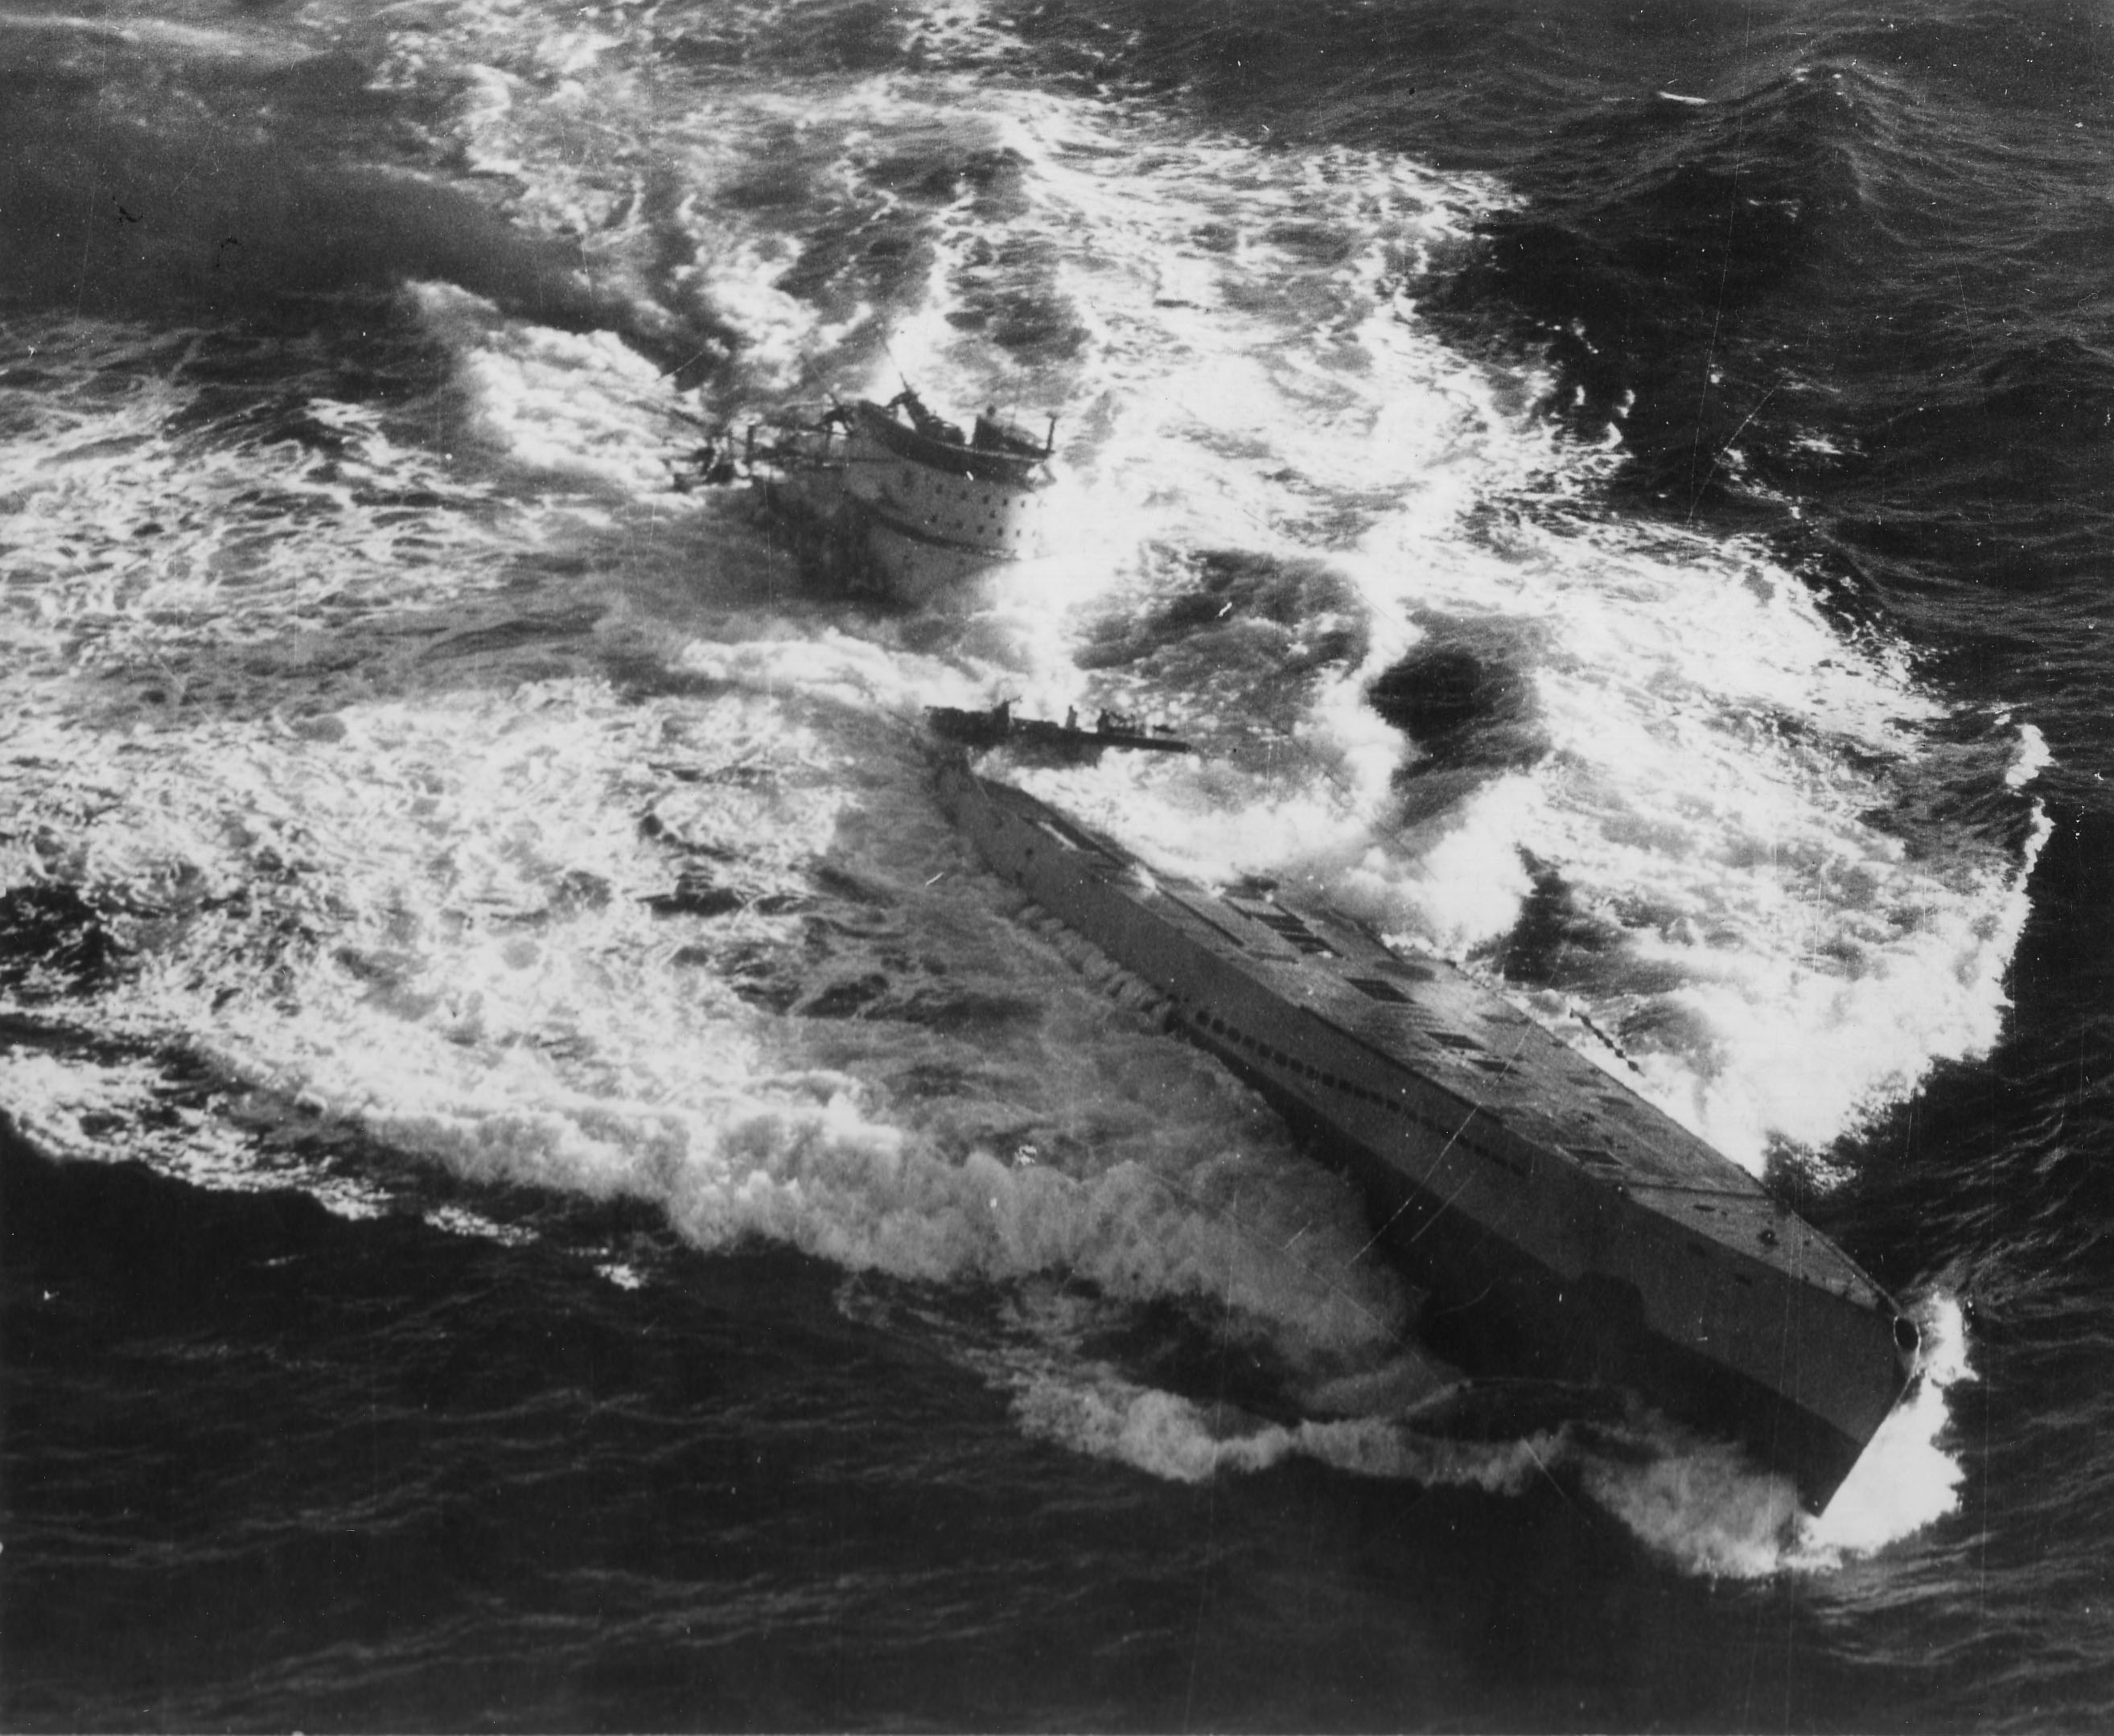 Type IXC/40 U-Boat U-185 foundering in the mid-Atlantic after an aerial depth charge attack by a TBF-1 Avenger from Escort Carrier USS Core, 24 Aug 1943. 36 were rescued while 43 perished.